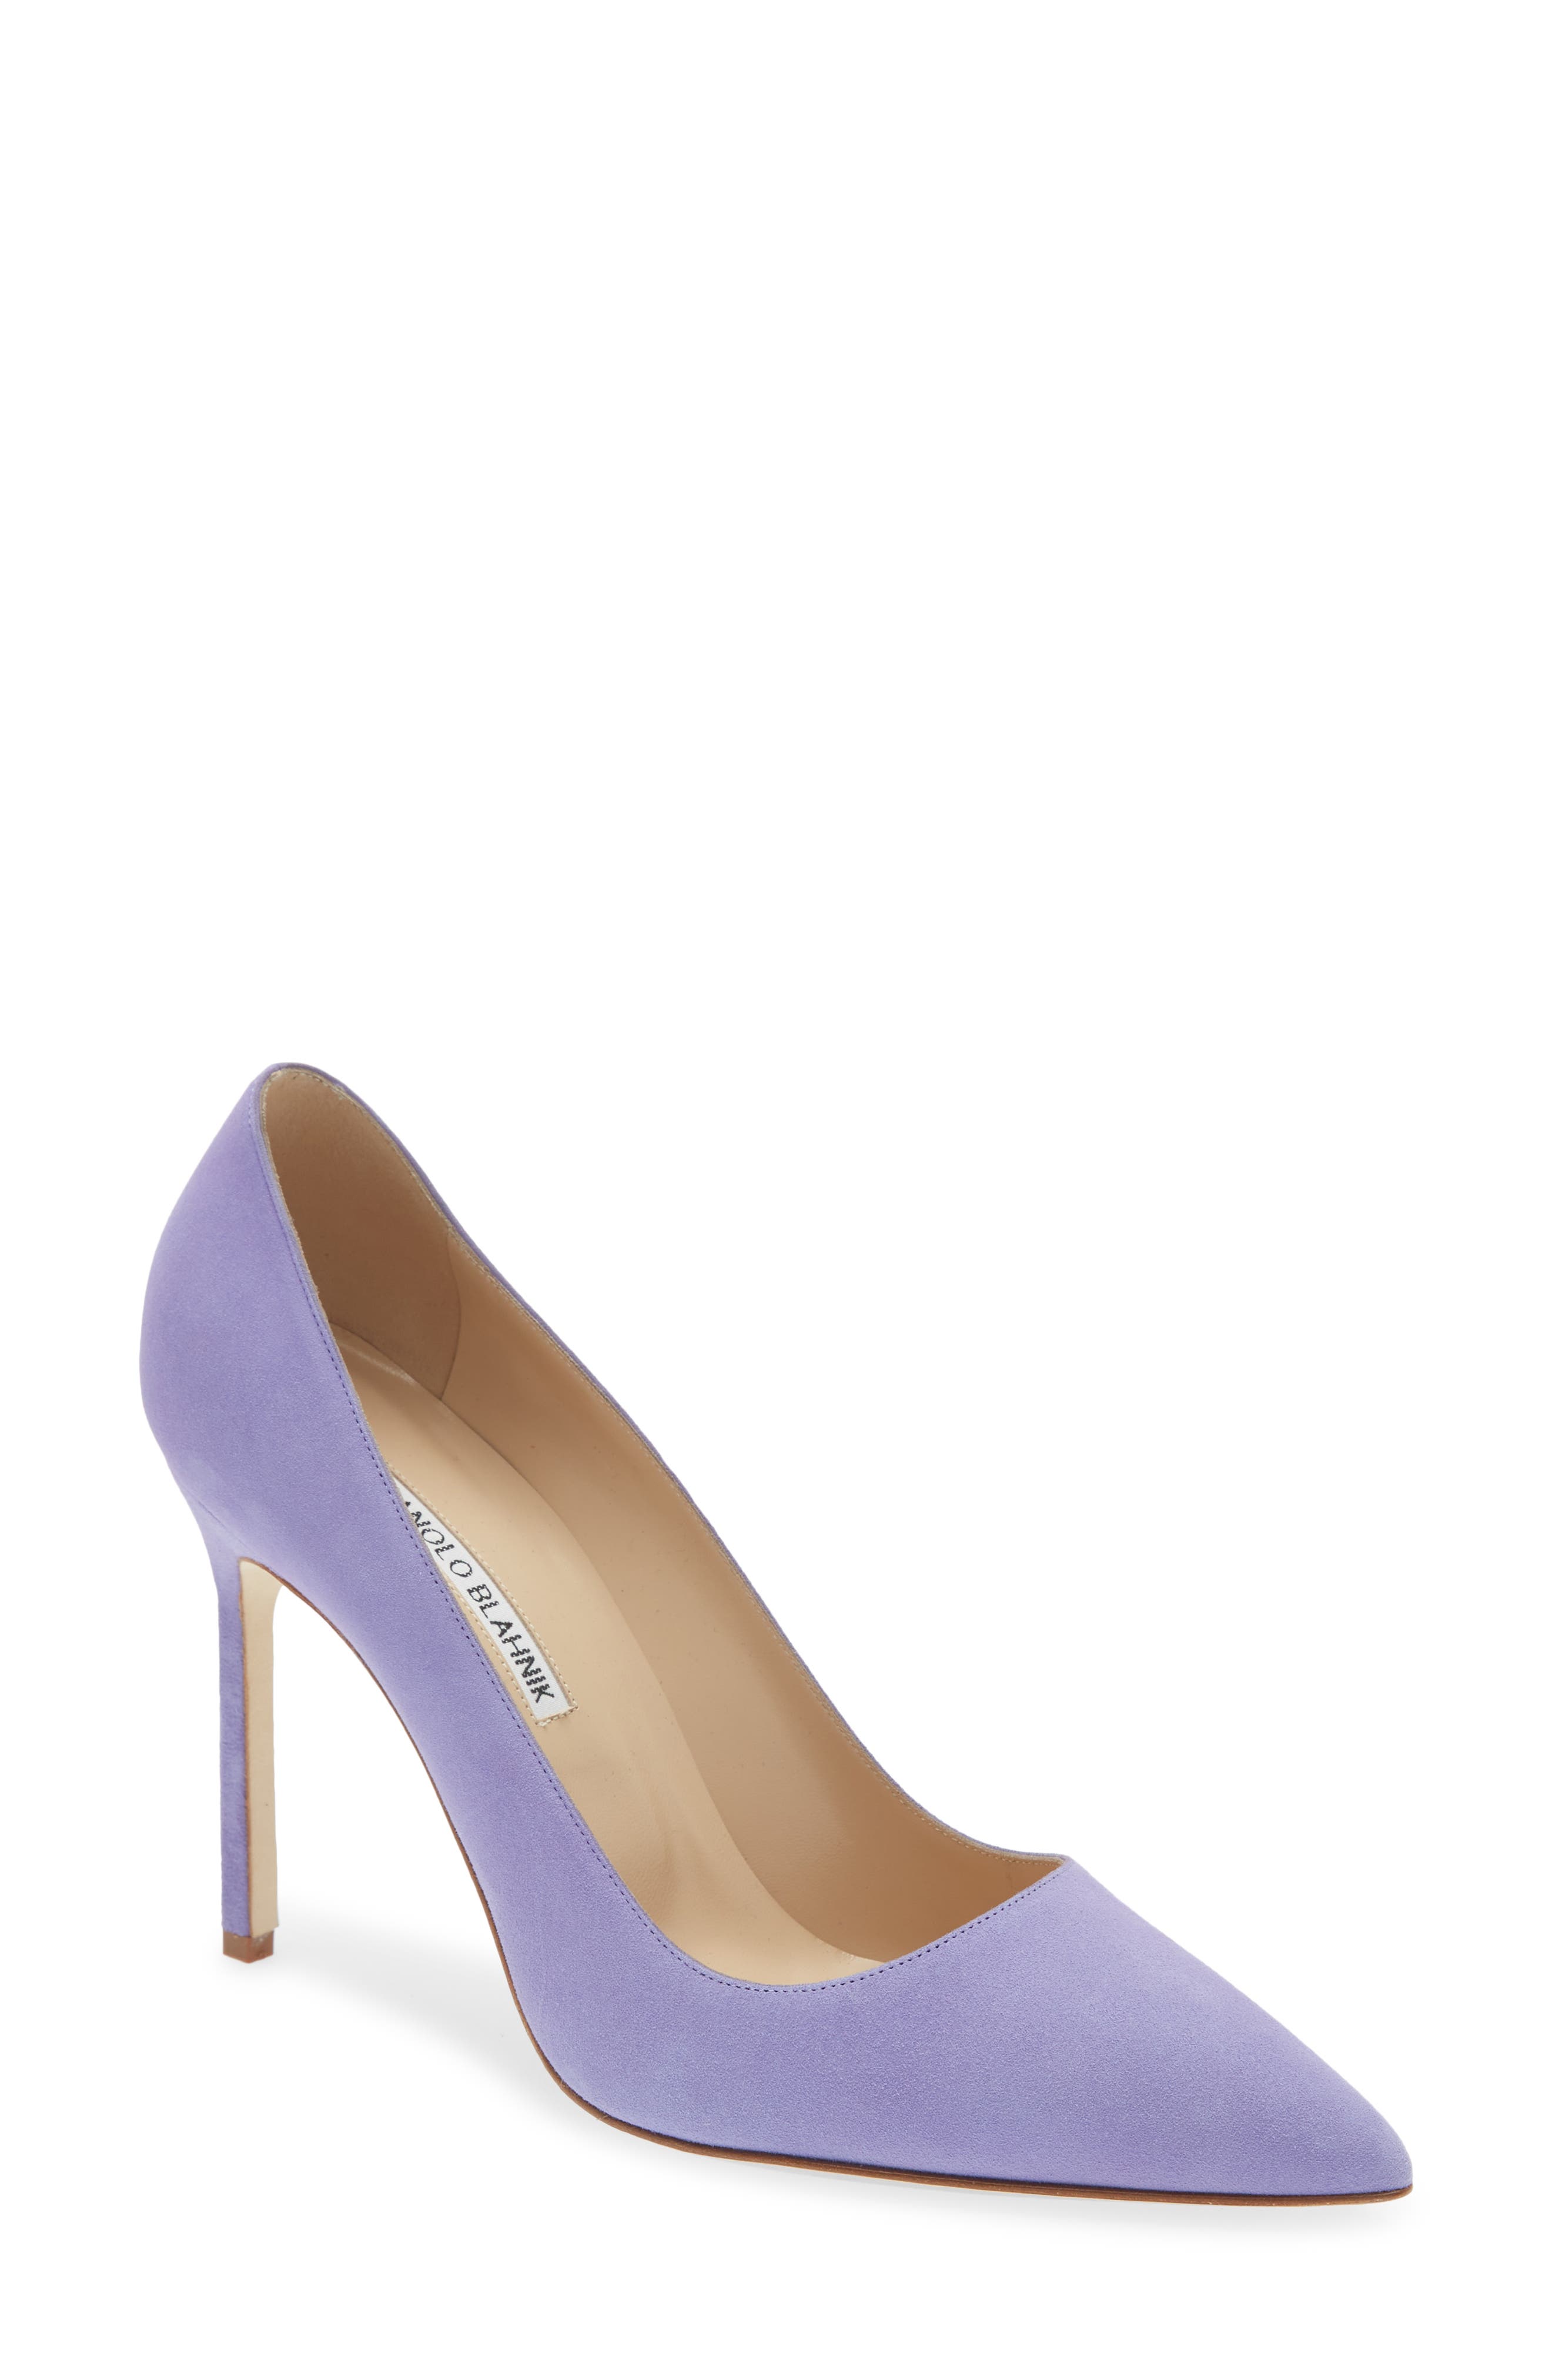 Manolo Blahnik BB Pointed Toe Pump in Purple at Nordstrom, Size 11Us